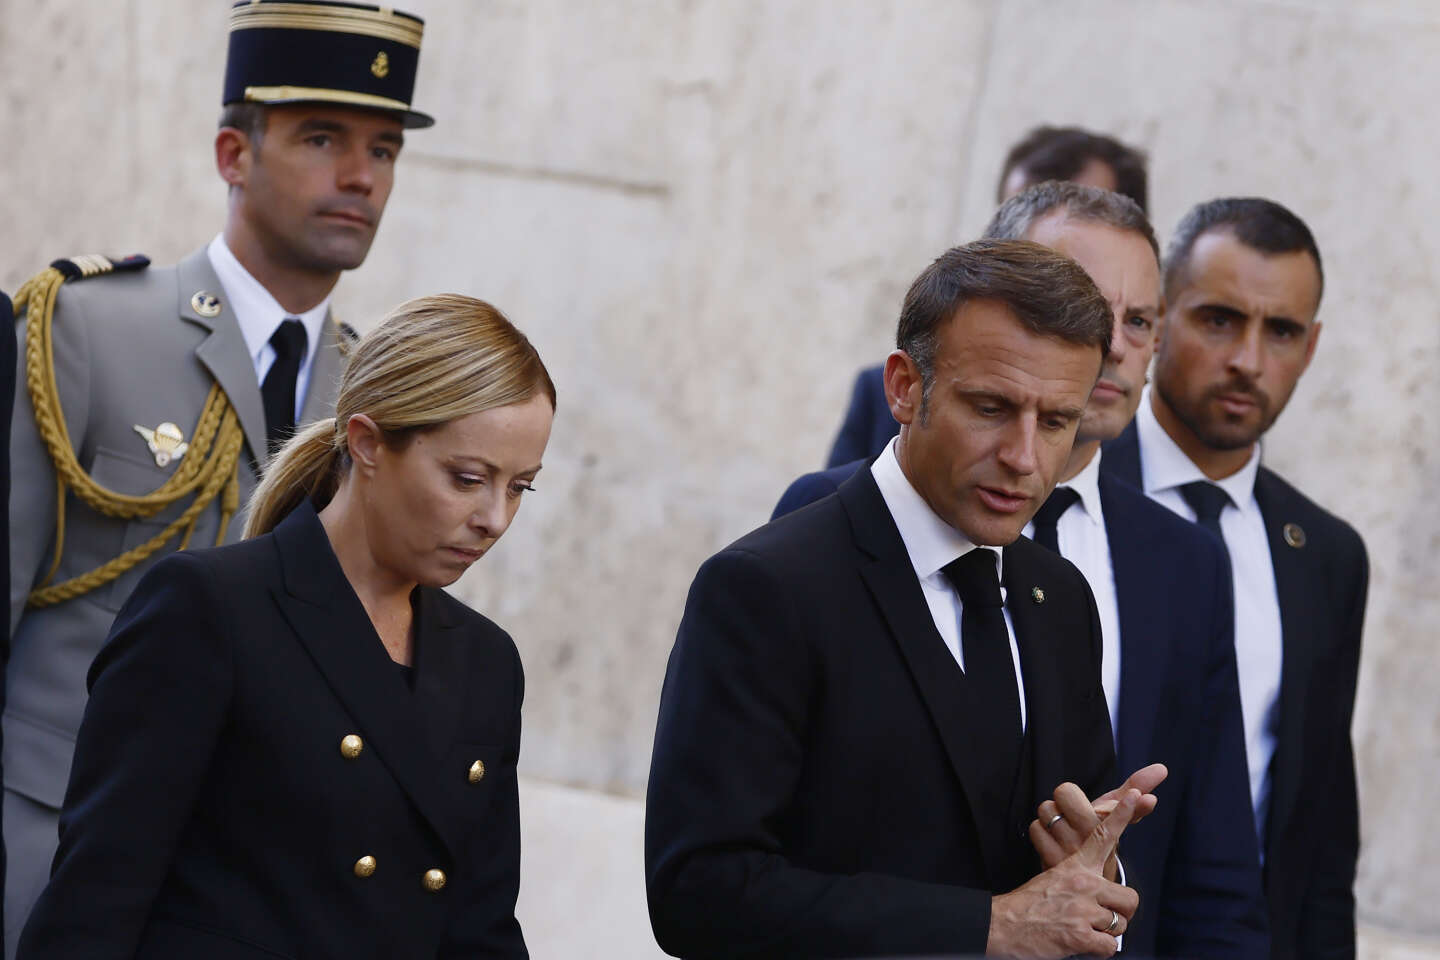 In Rome, the meeting between Giorgia Meloni and Emmanuel Macron marks their convergence on the migration issue